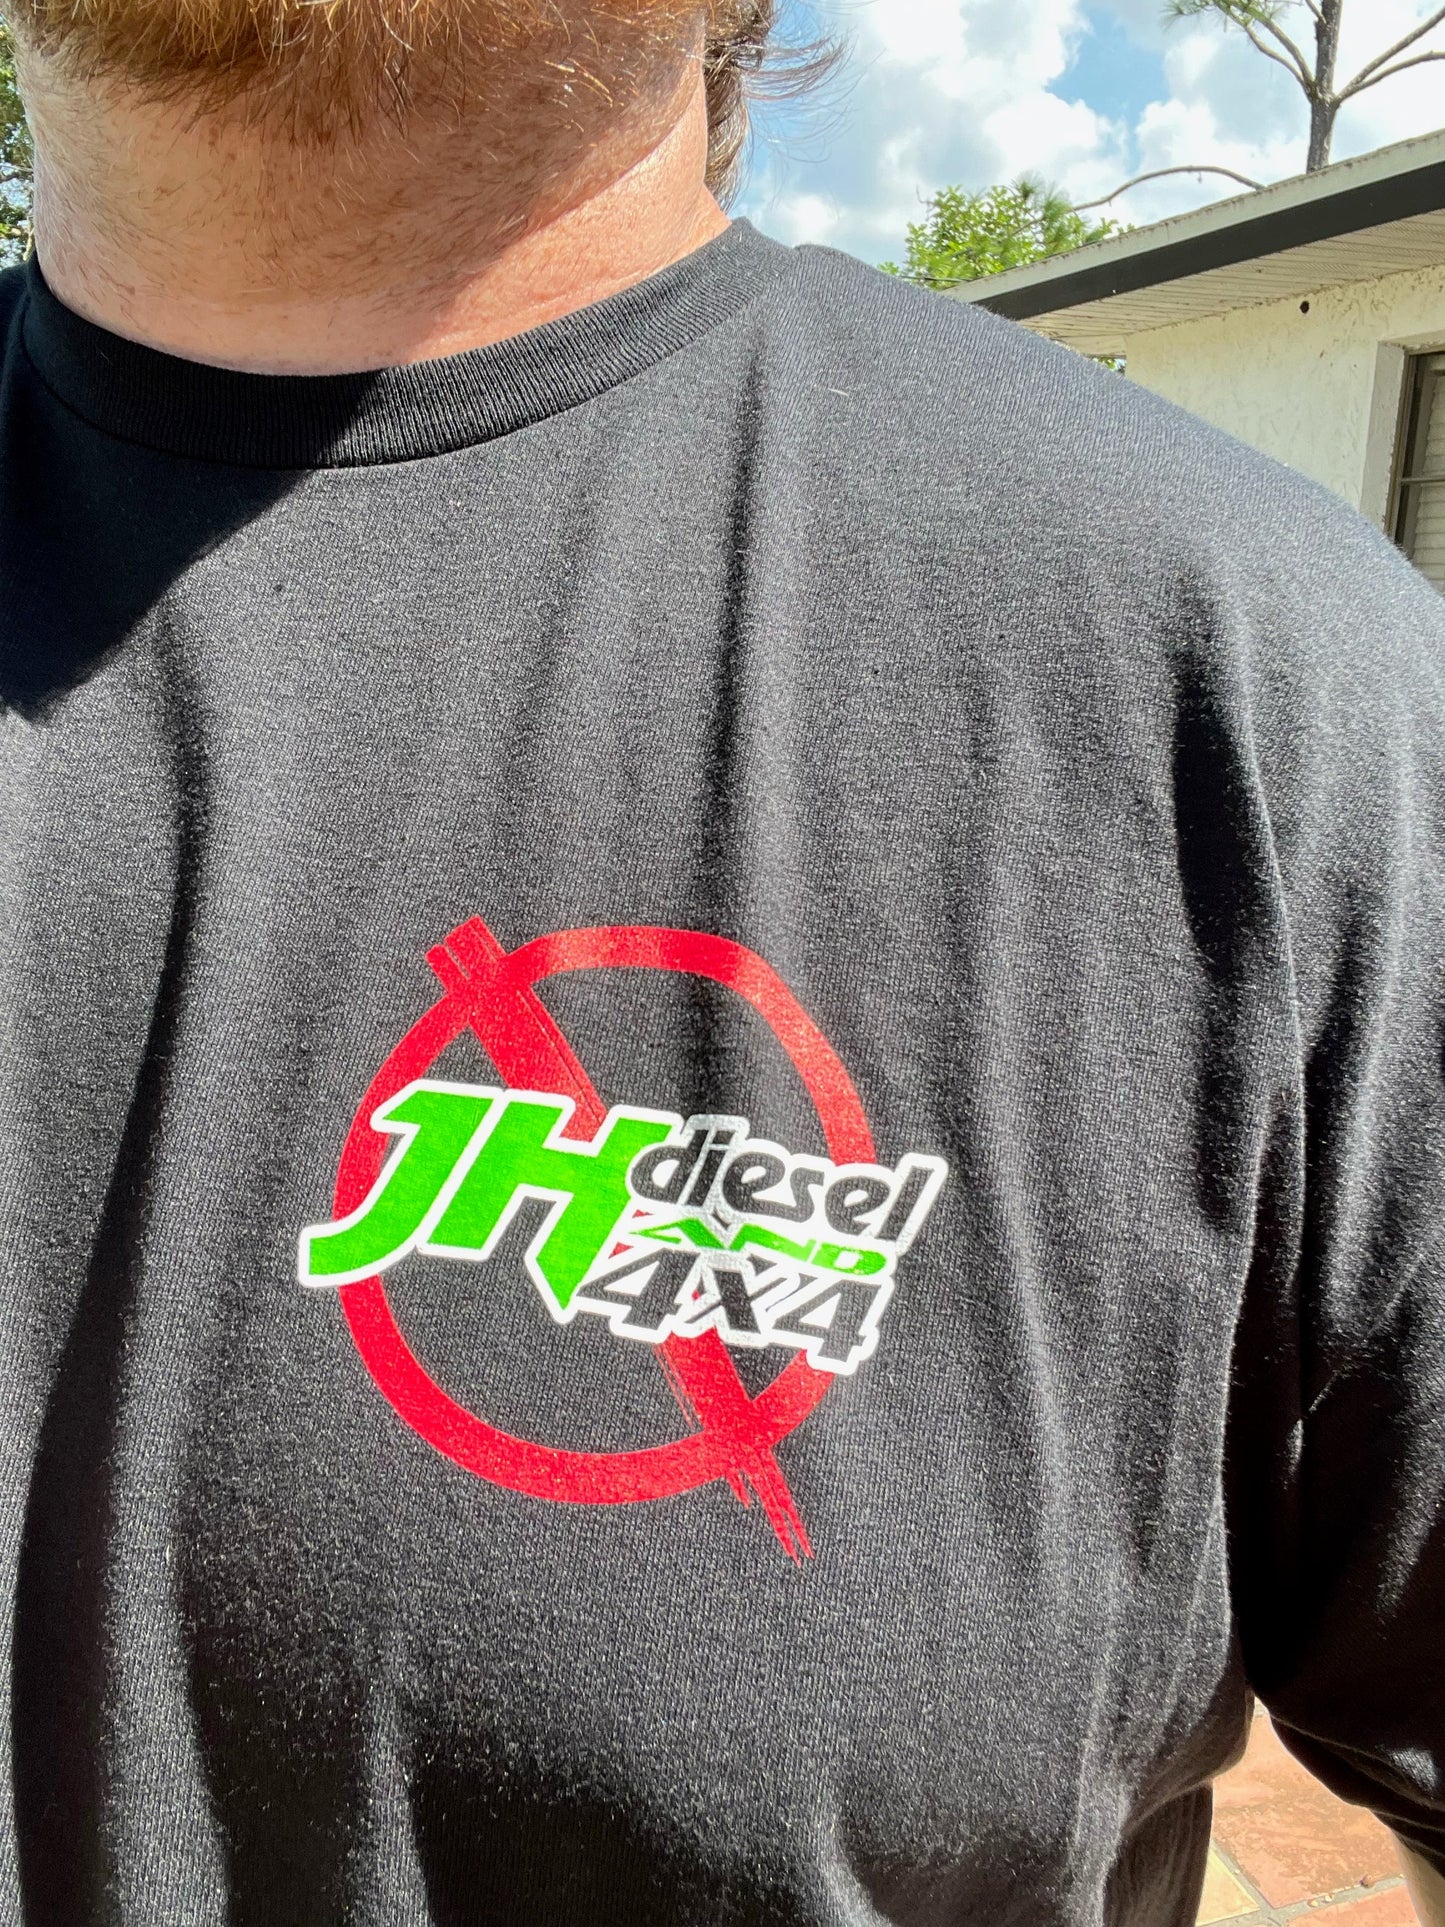 JH's Diesel Long Sleeve Safety Meeting Shirt